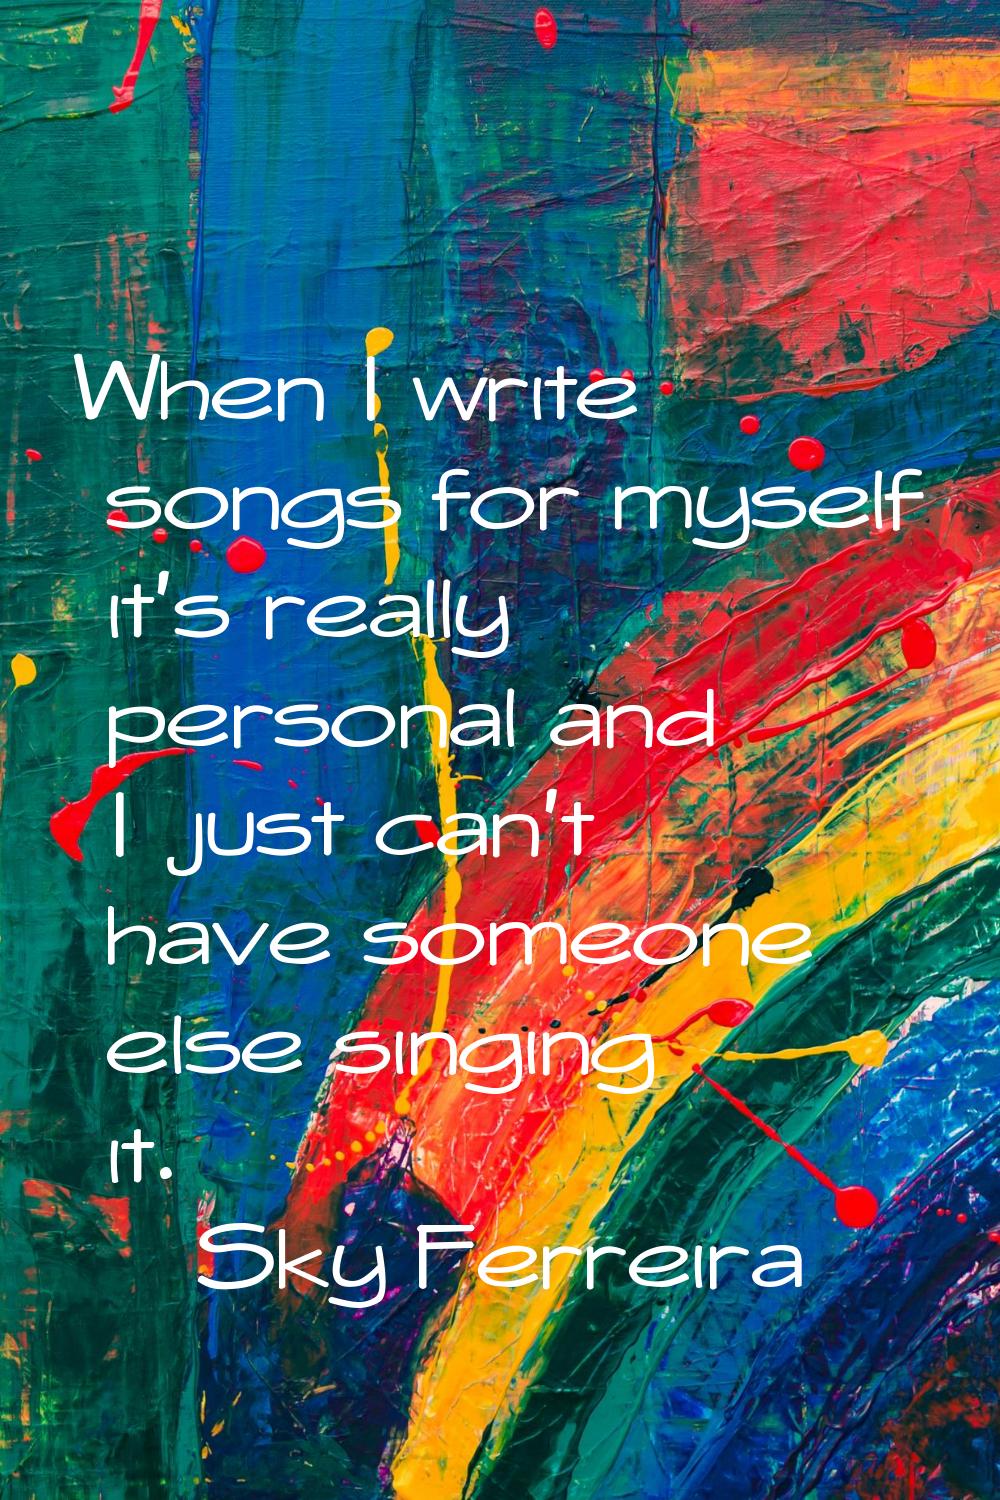 When I write songs for myself it's really personal and I just can't have someone else singing it.